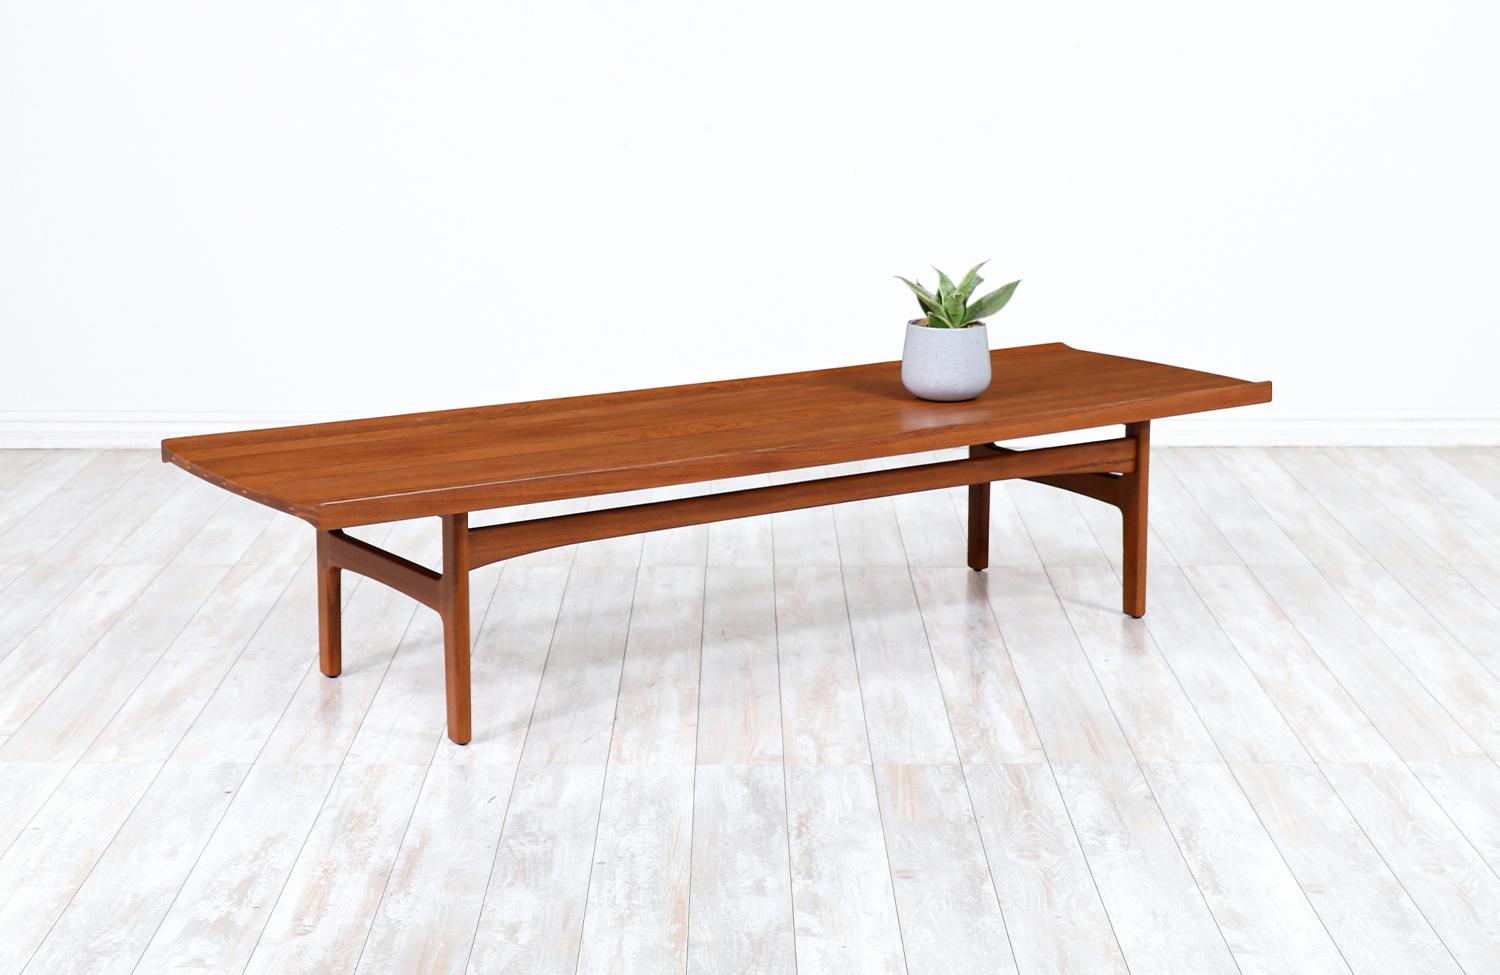 Tove & Edvard Kindt-Larsen teak coffee table by for Dux.

________________________________________

Transforming a piece of Mid-Century Modern furniture is like bringing history back to life, and we take this journey with passion and precision. With